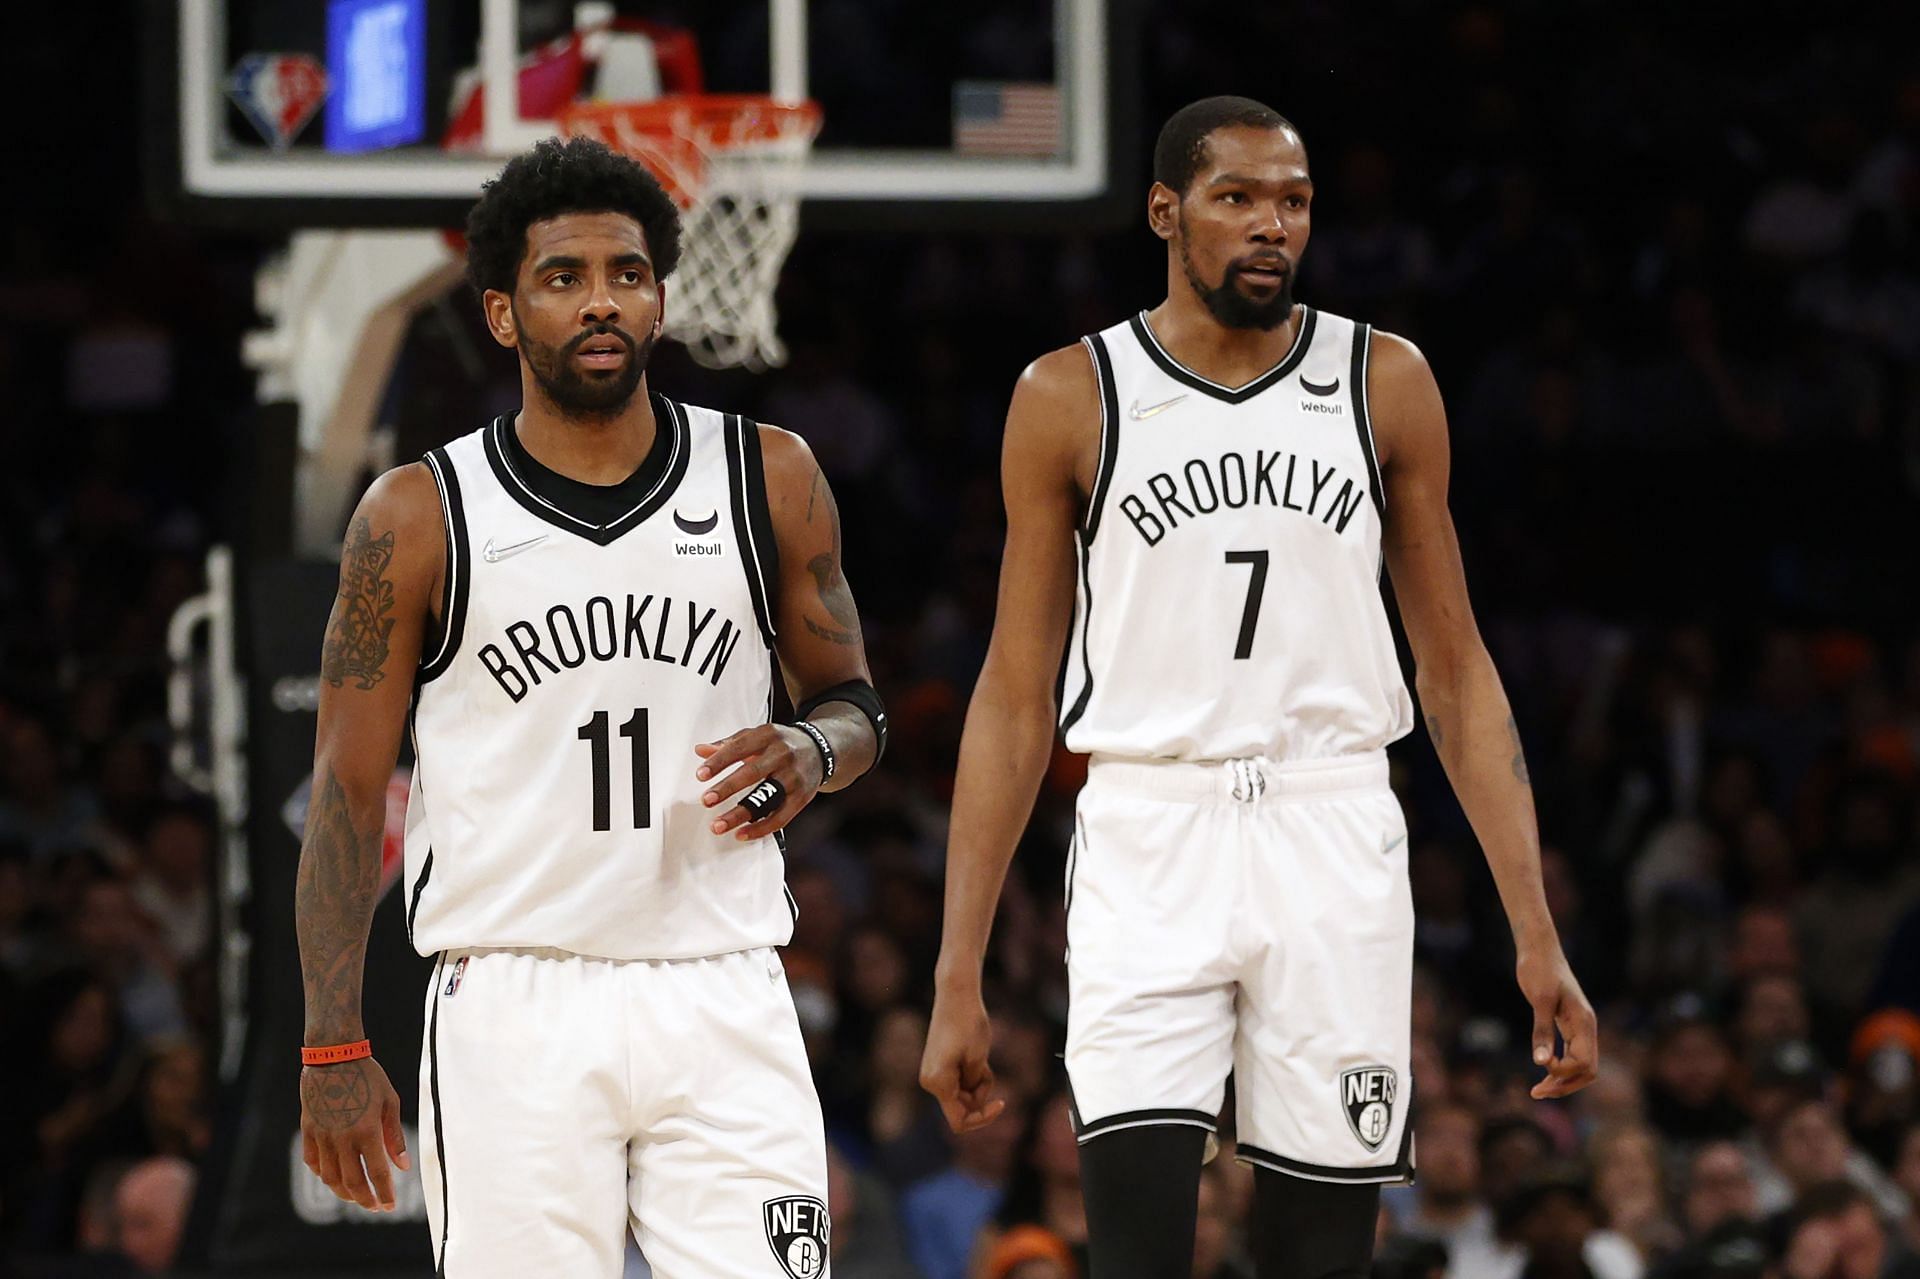 Kyrie Irving (left) and Kevin Durant of the Brooklyn Nets